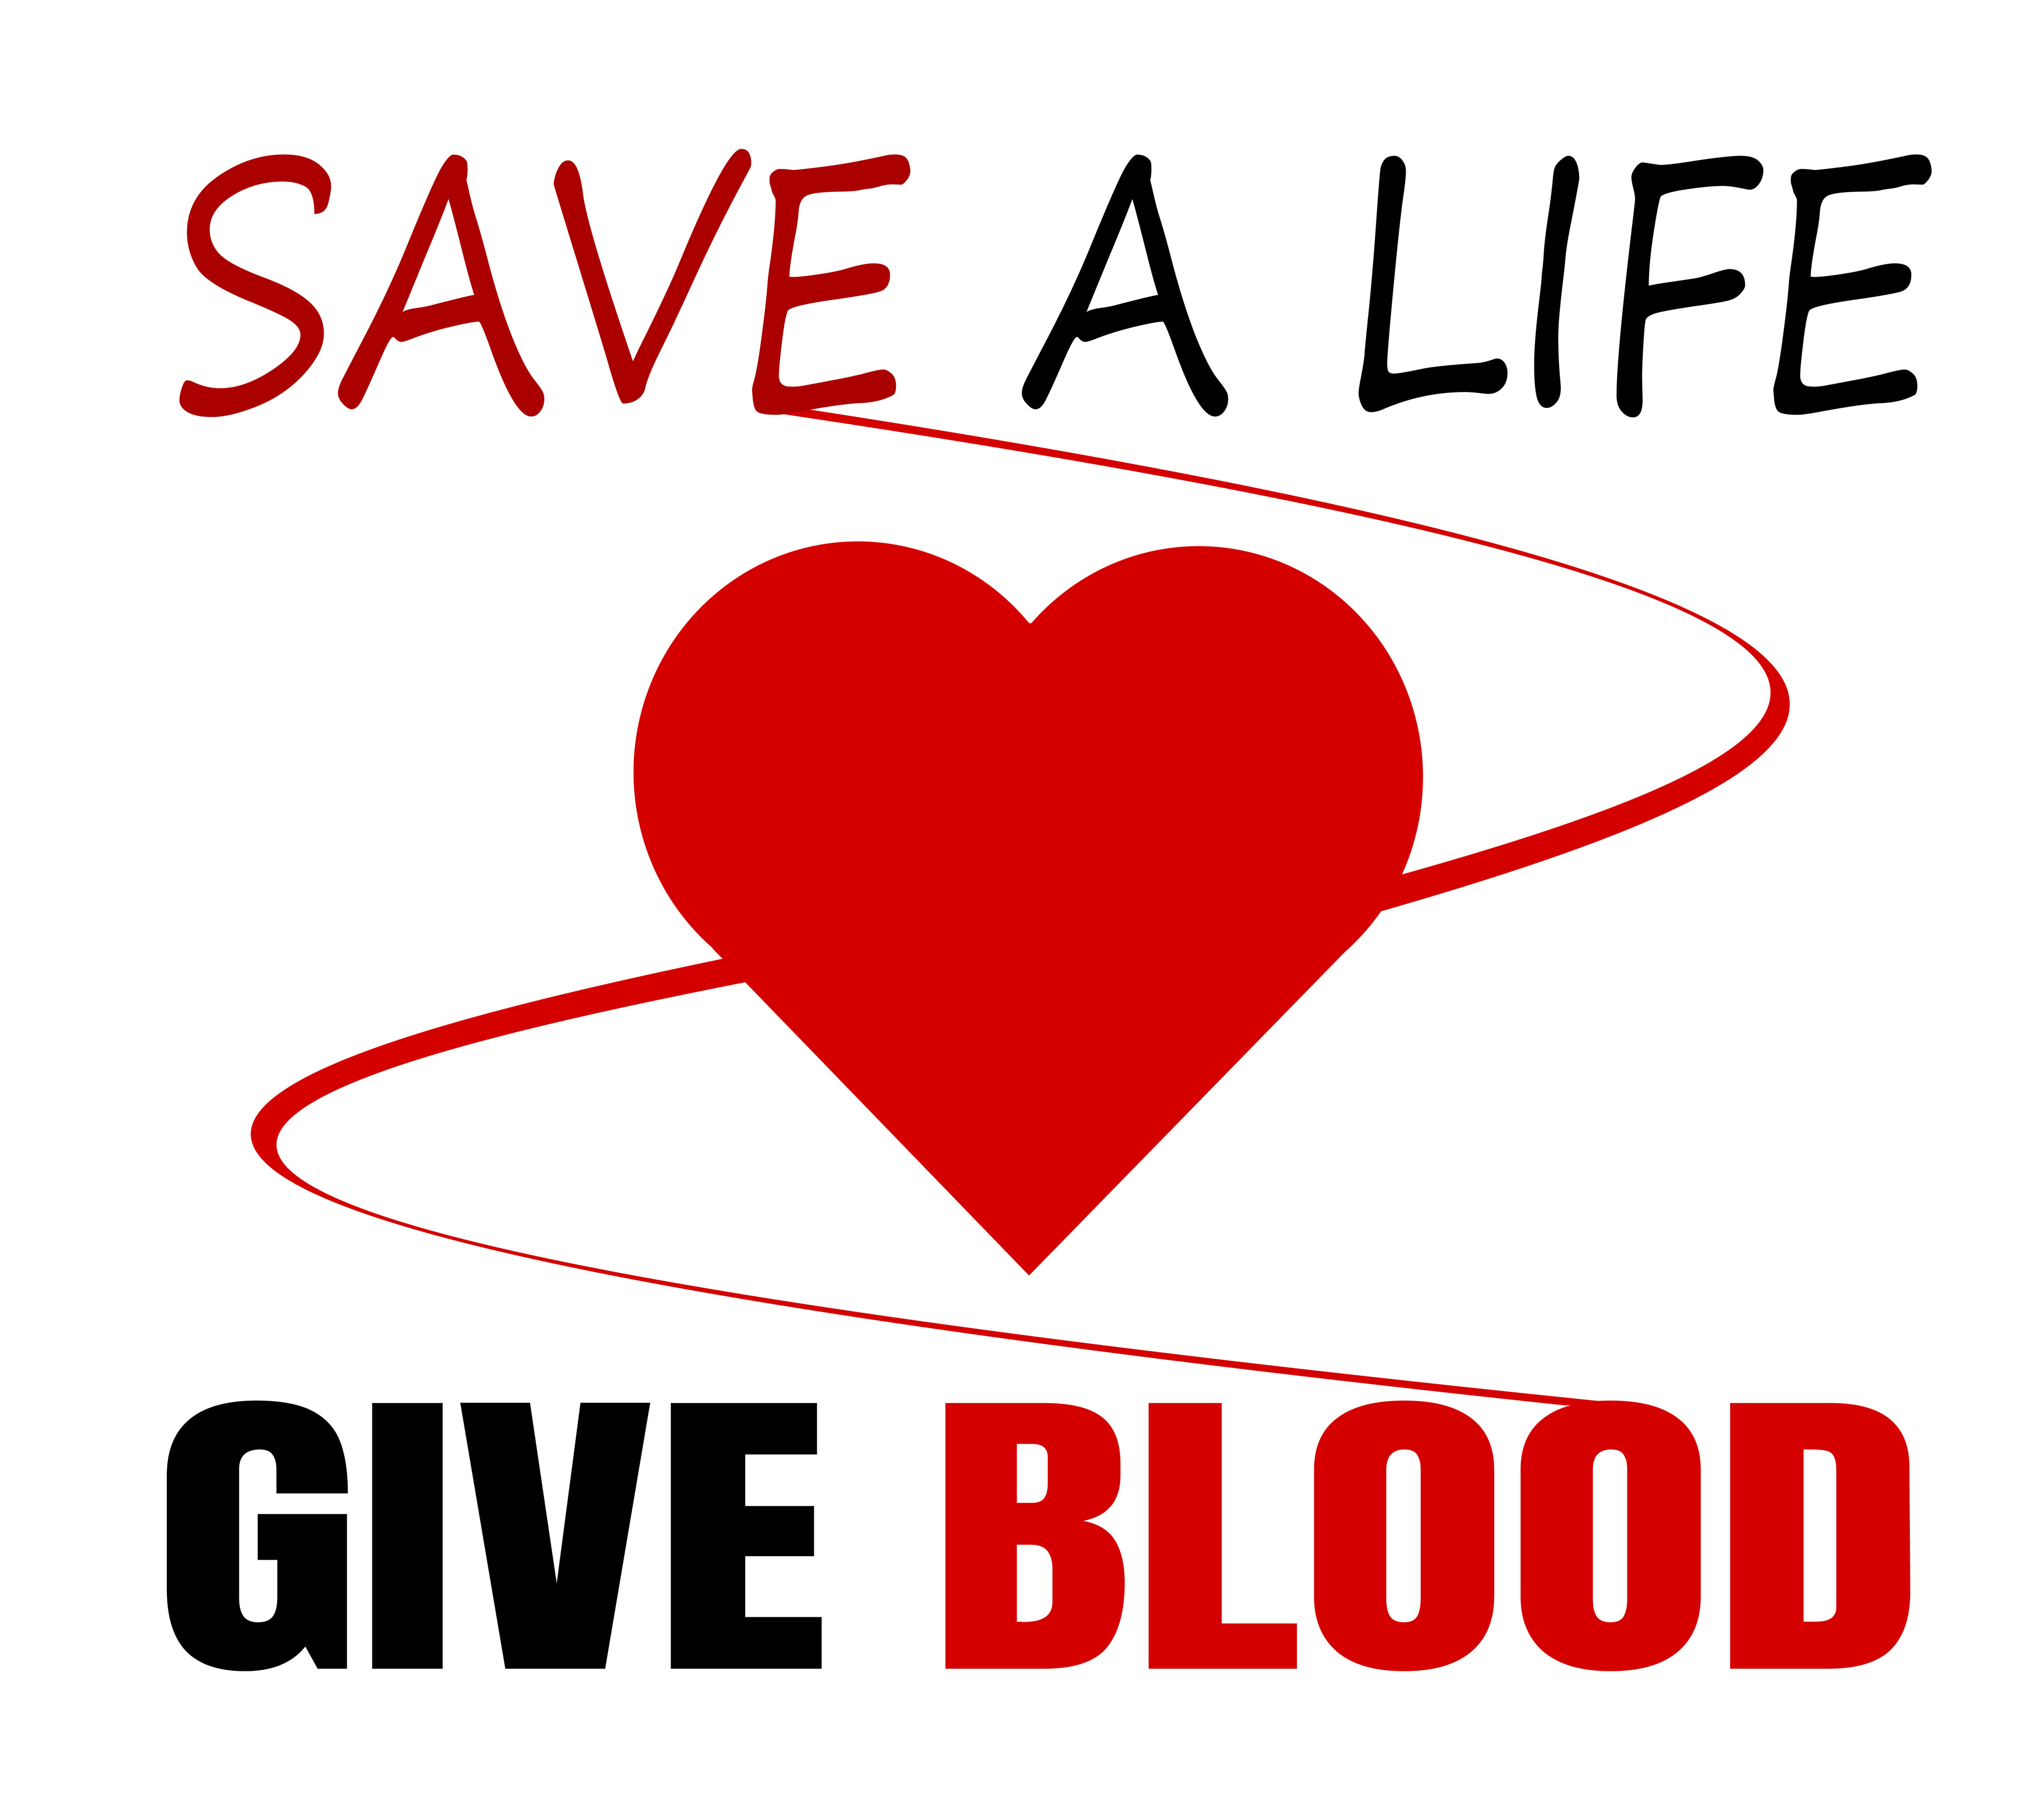 Save a life, give blood picture. 